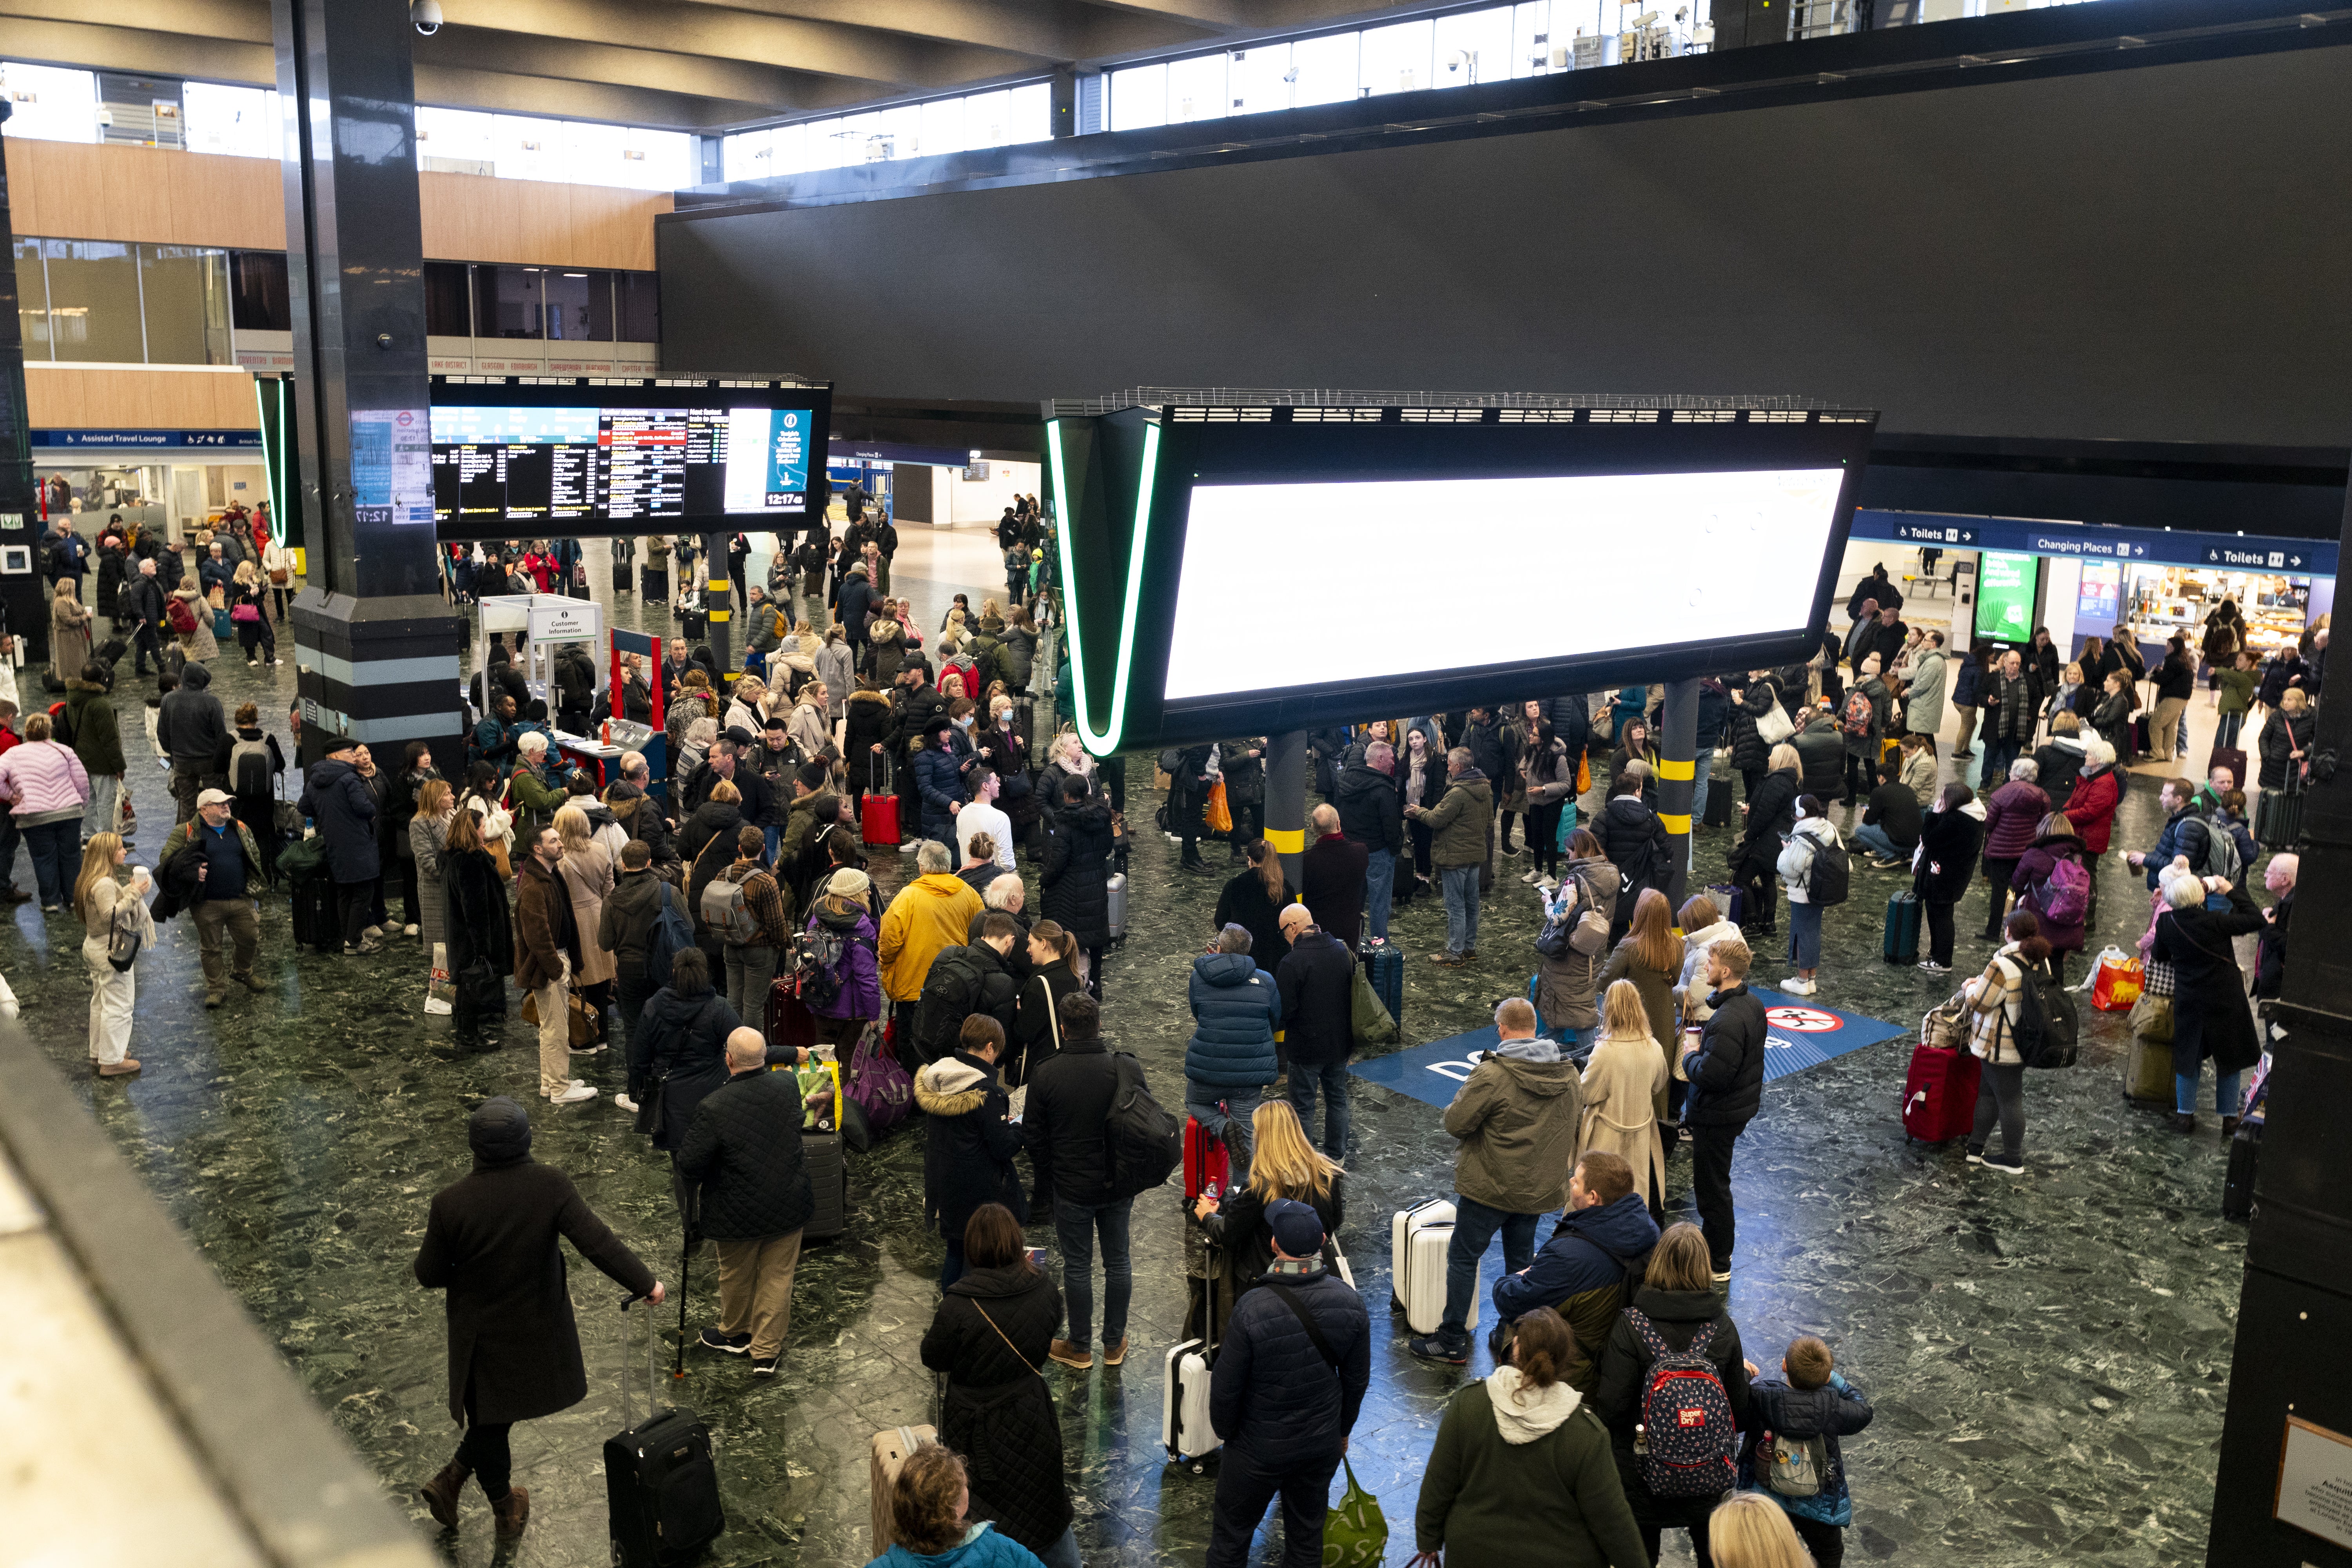 Euston station, pictured here in January, has been hit by severe disruption